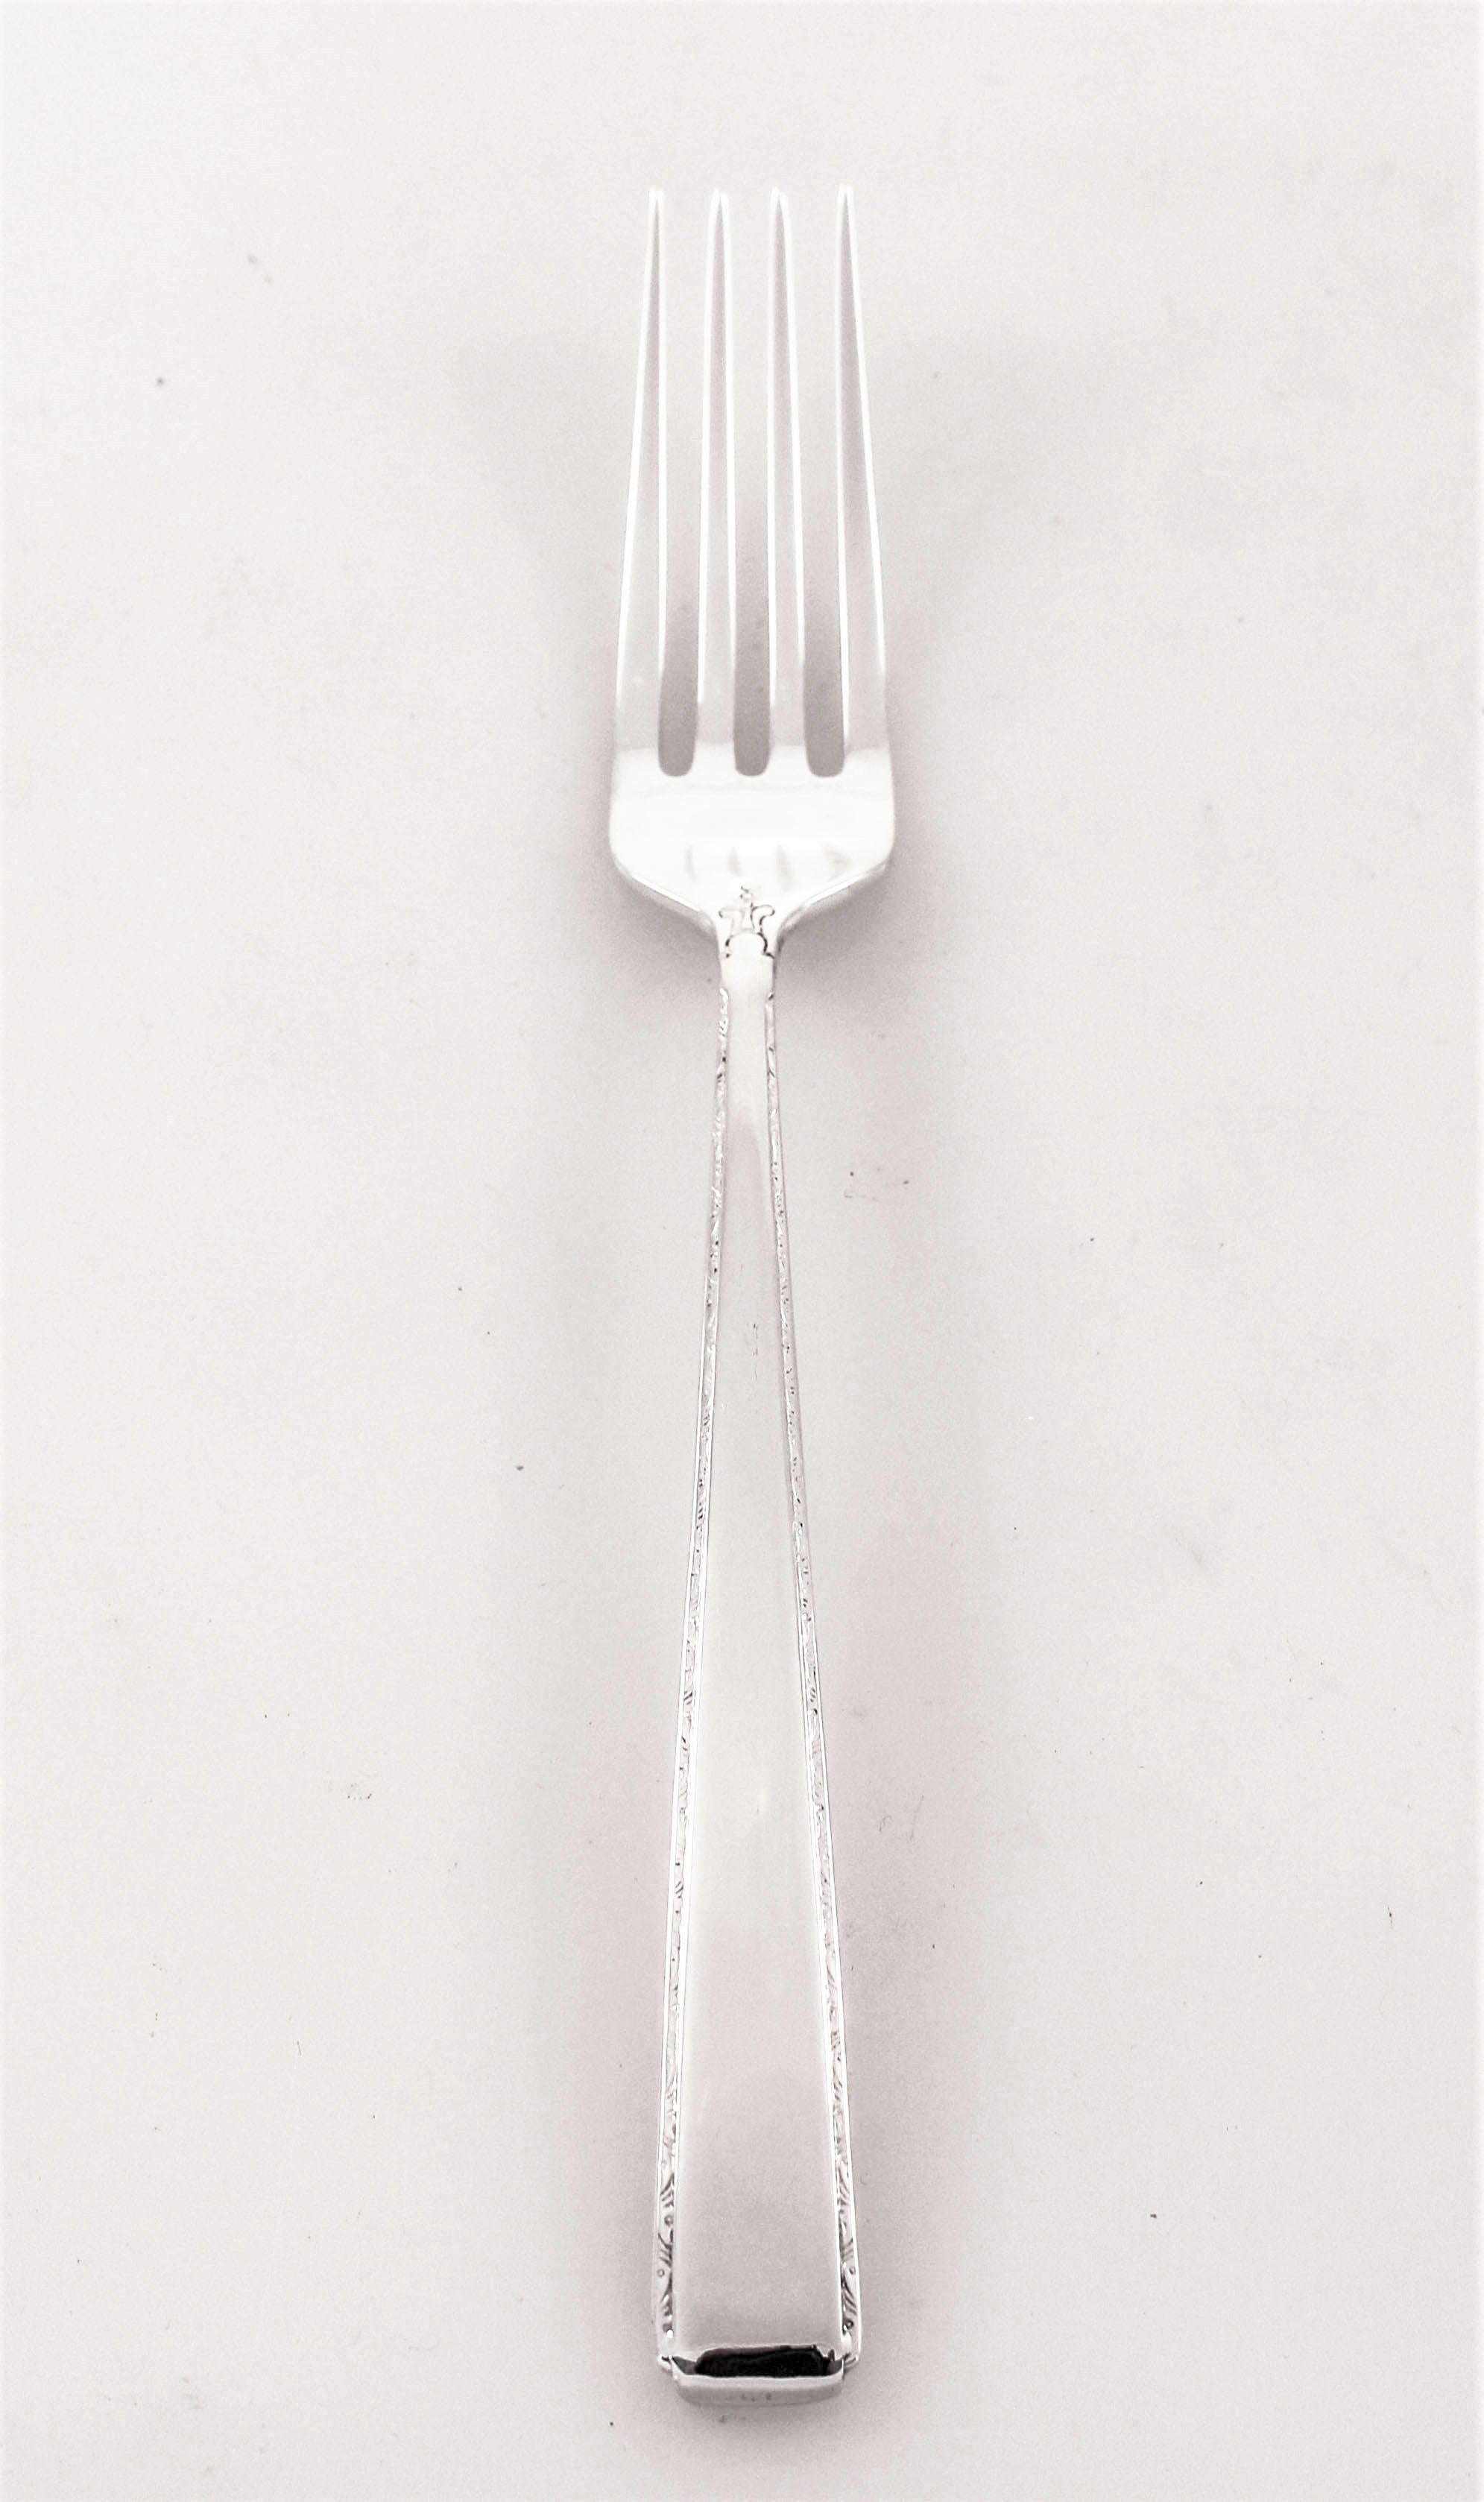 We have this gorgeous sterling silver flatware set priced to sell. Identical to Towle’s 1939 “Old Lace” pattern, this set is from the same period. A thin decorative motif runs down each side of the handle. At the very bottom a slight indentation on